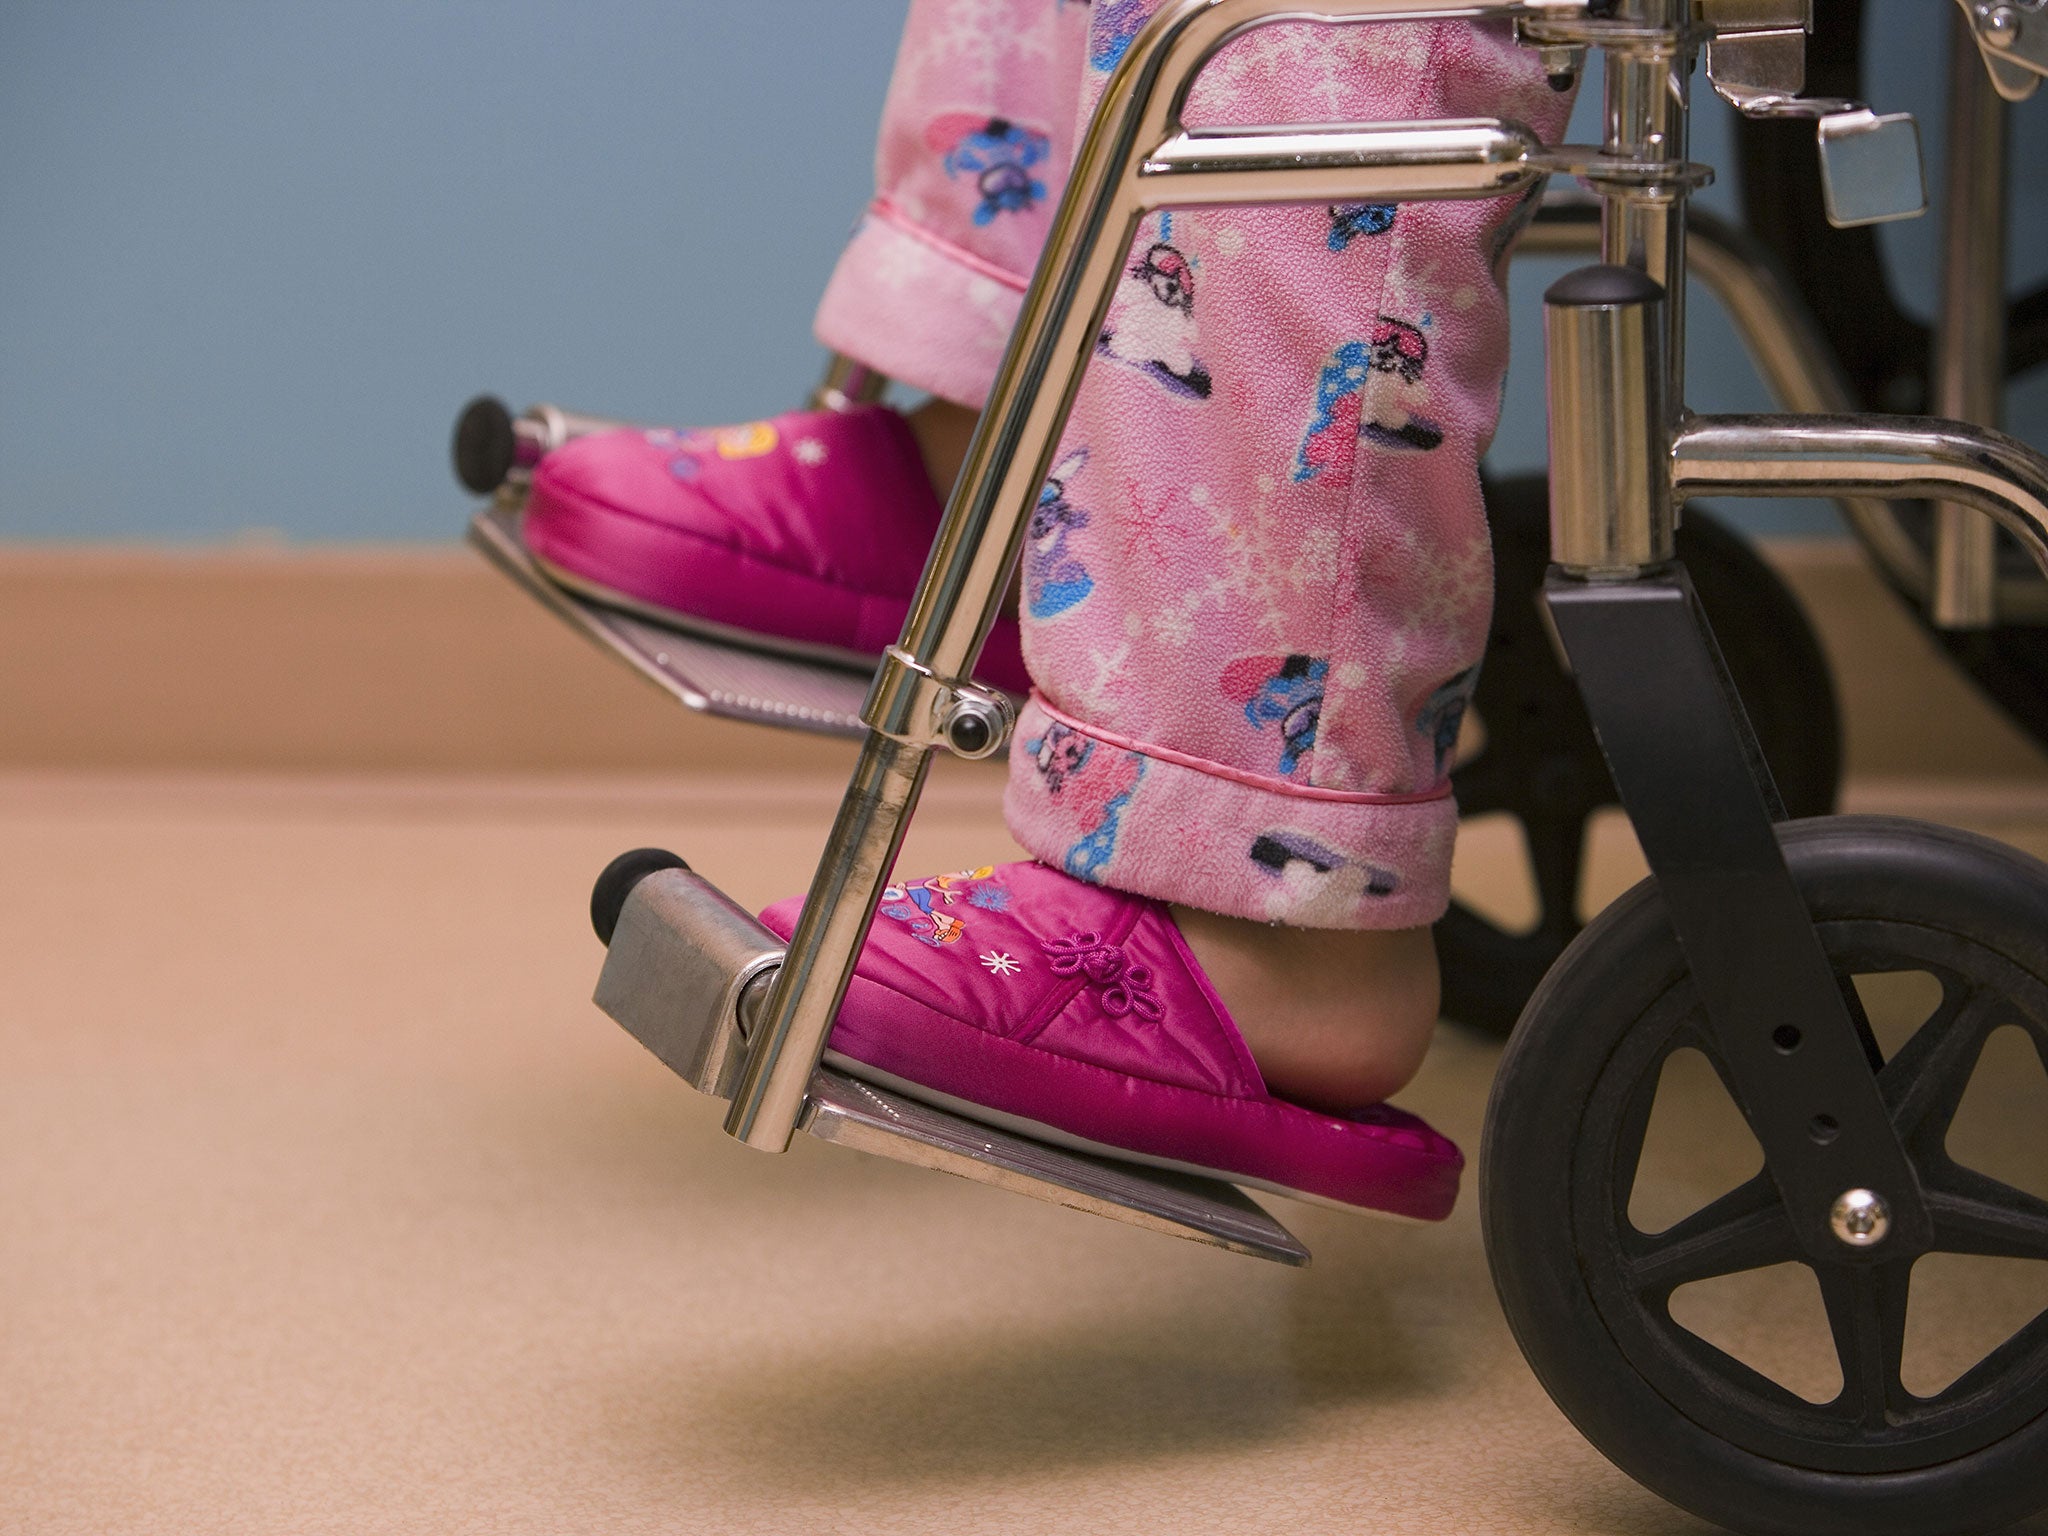 A major study concludes that soaring numbers of families with disabled children are being forced to go without food or heating because they can no longer afford the basics